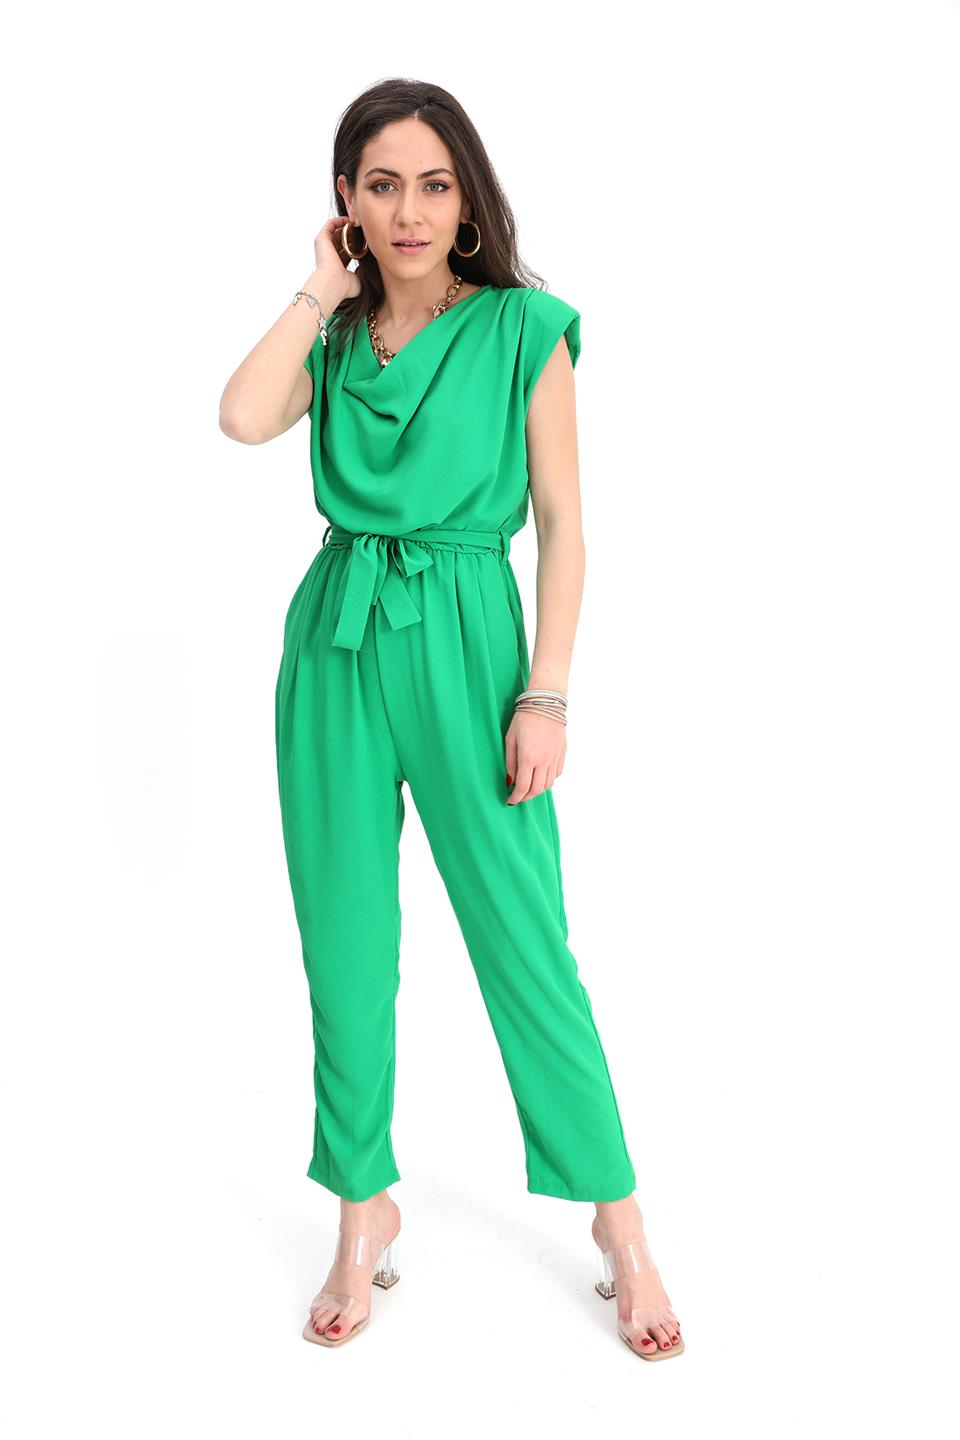 Women's Jumpsuit Degajeed Collar Shoulders Padded Belted - Green - STREETMODE™